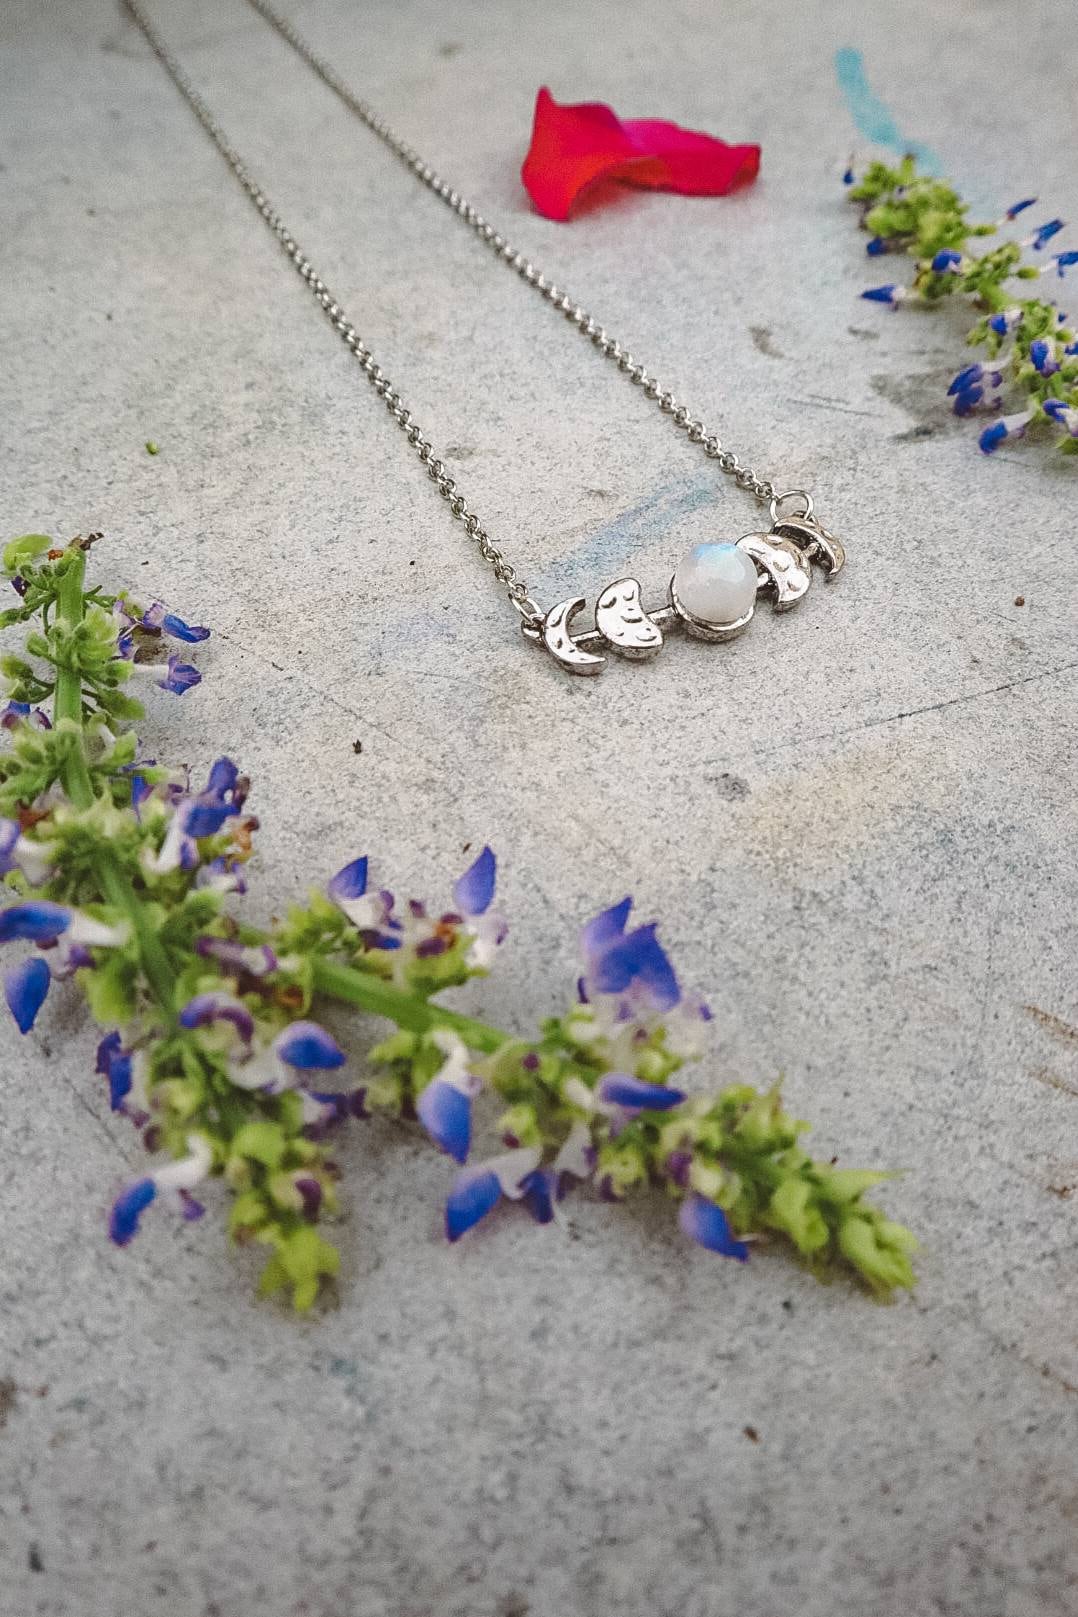 Rainbow Moonstone Moon Phases Necklace - Silver - Triple Moon Goddess Necklace - Celestial Jewelry - Celestial Necklace - June Birthstone